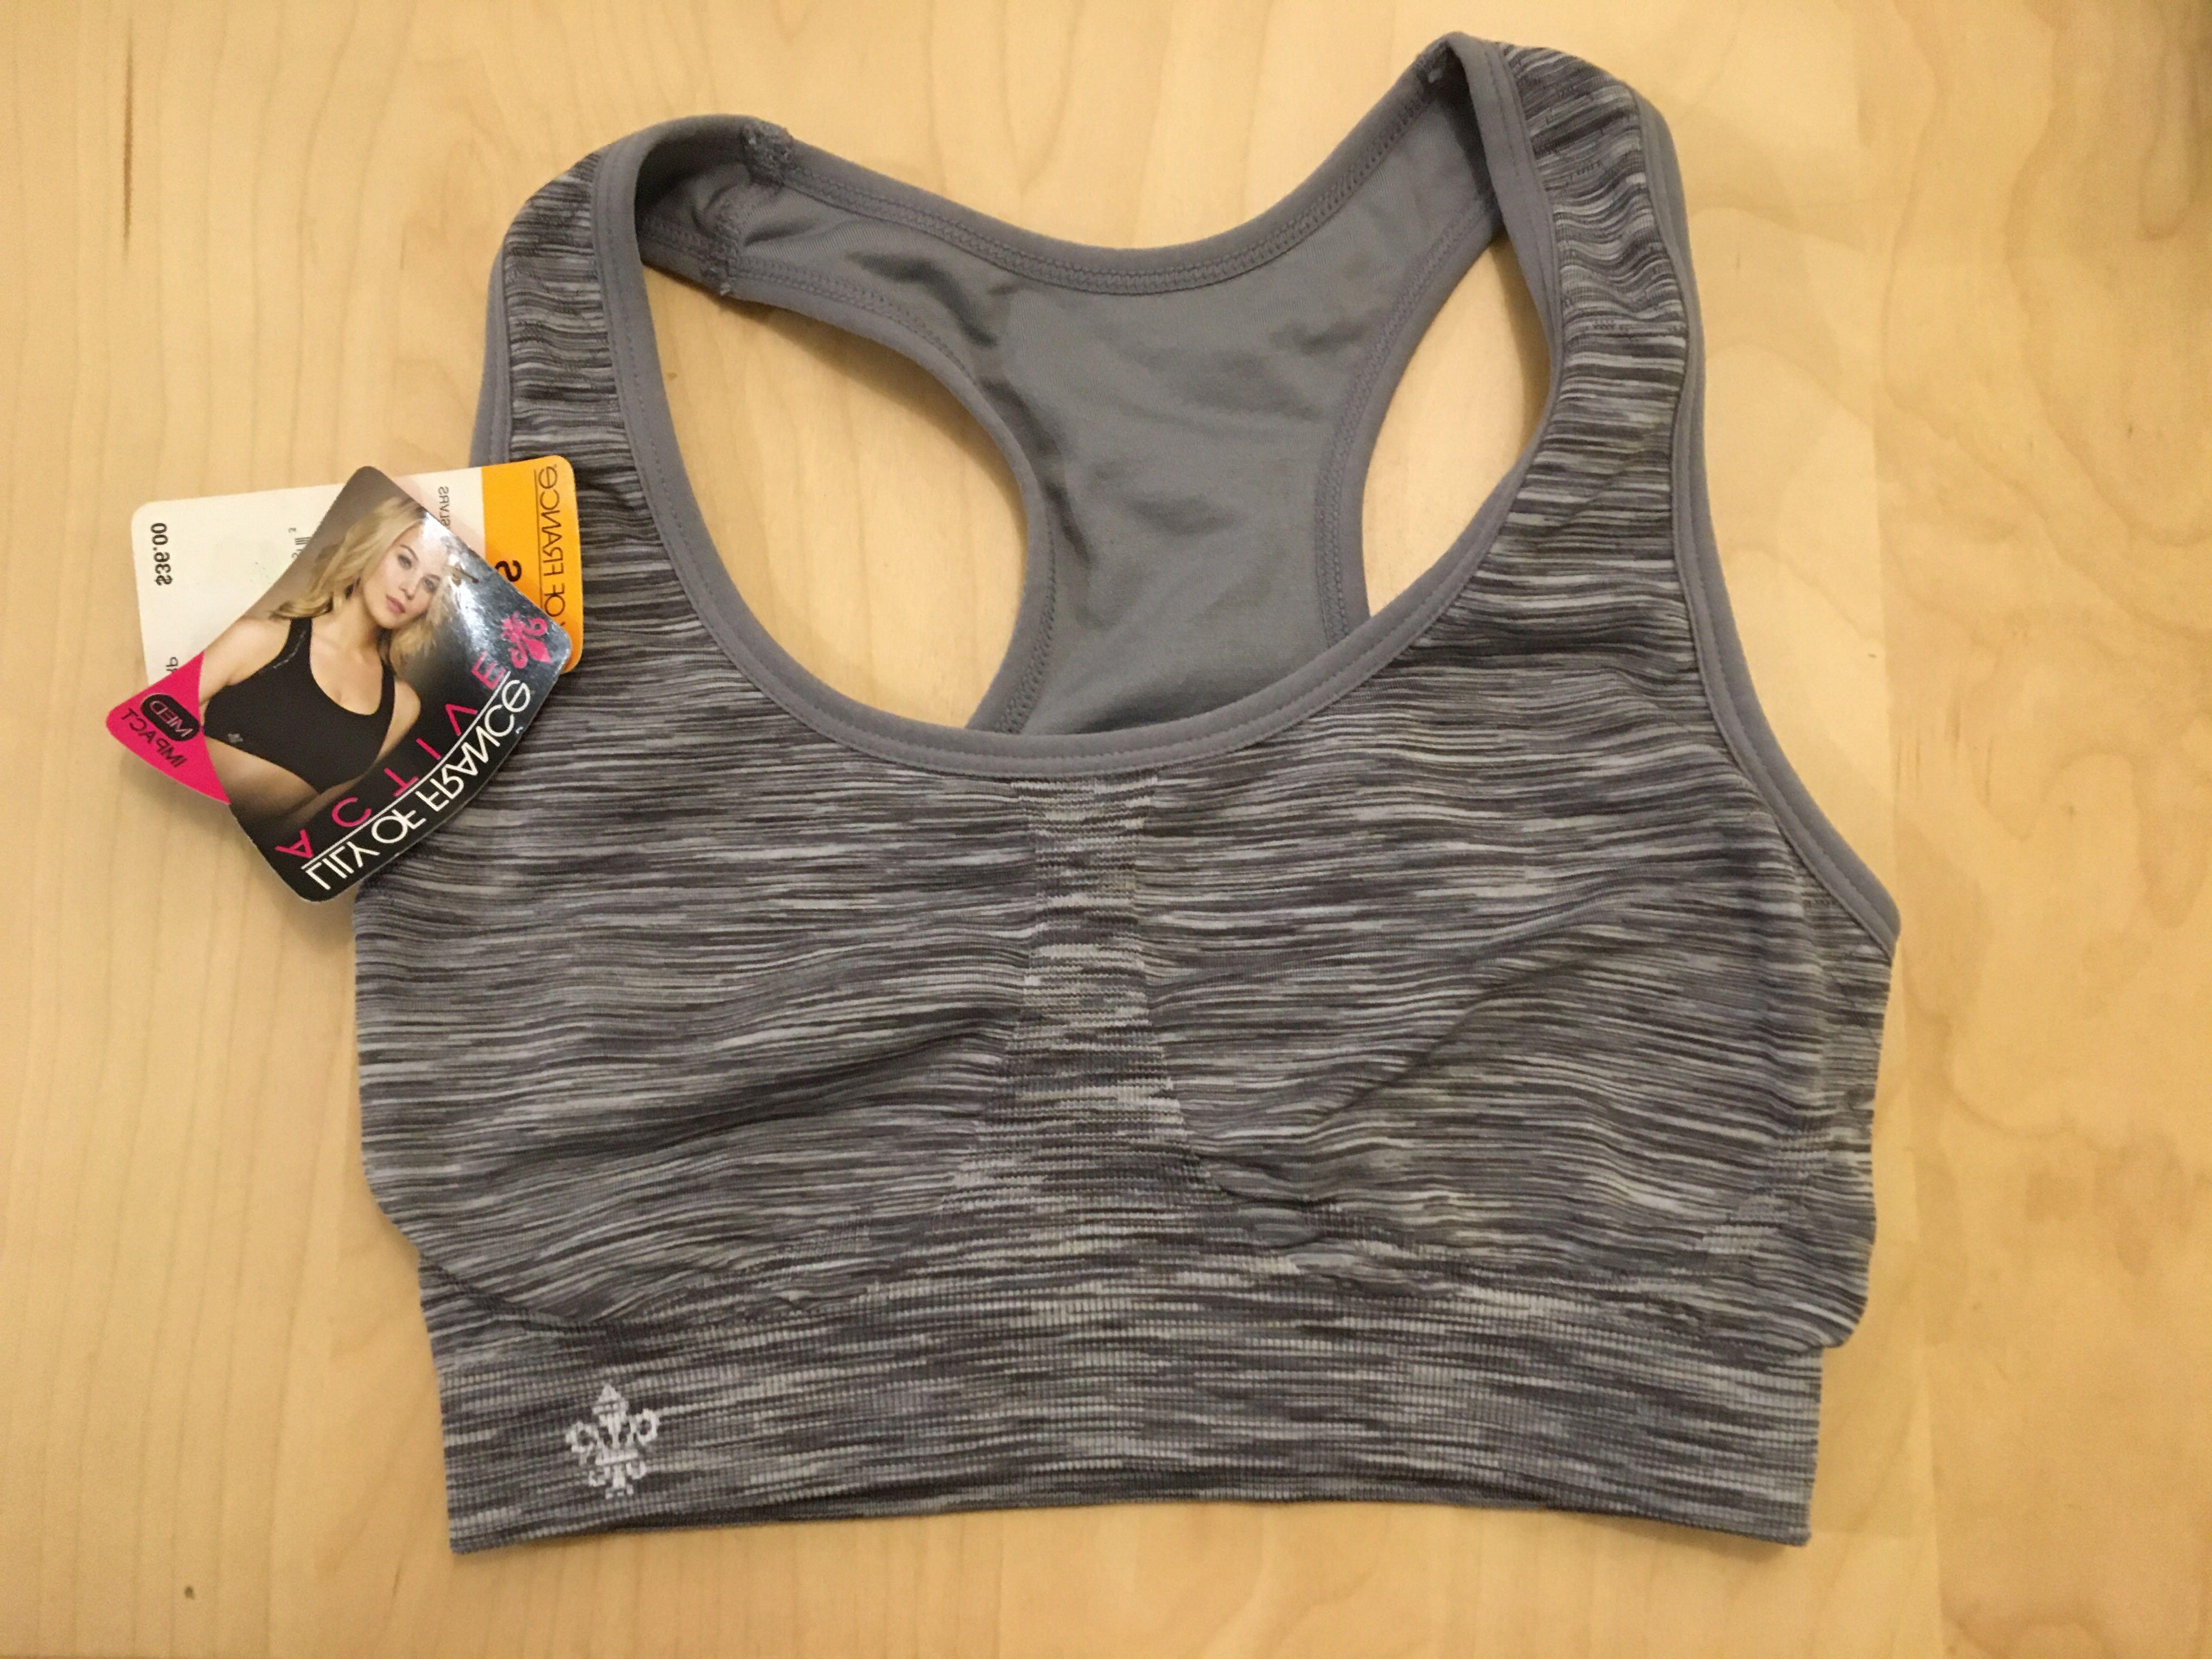 Lily of France Grey sports bra size small, Women's Fashion, New  Undergarments & Loungewear on Carousell